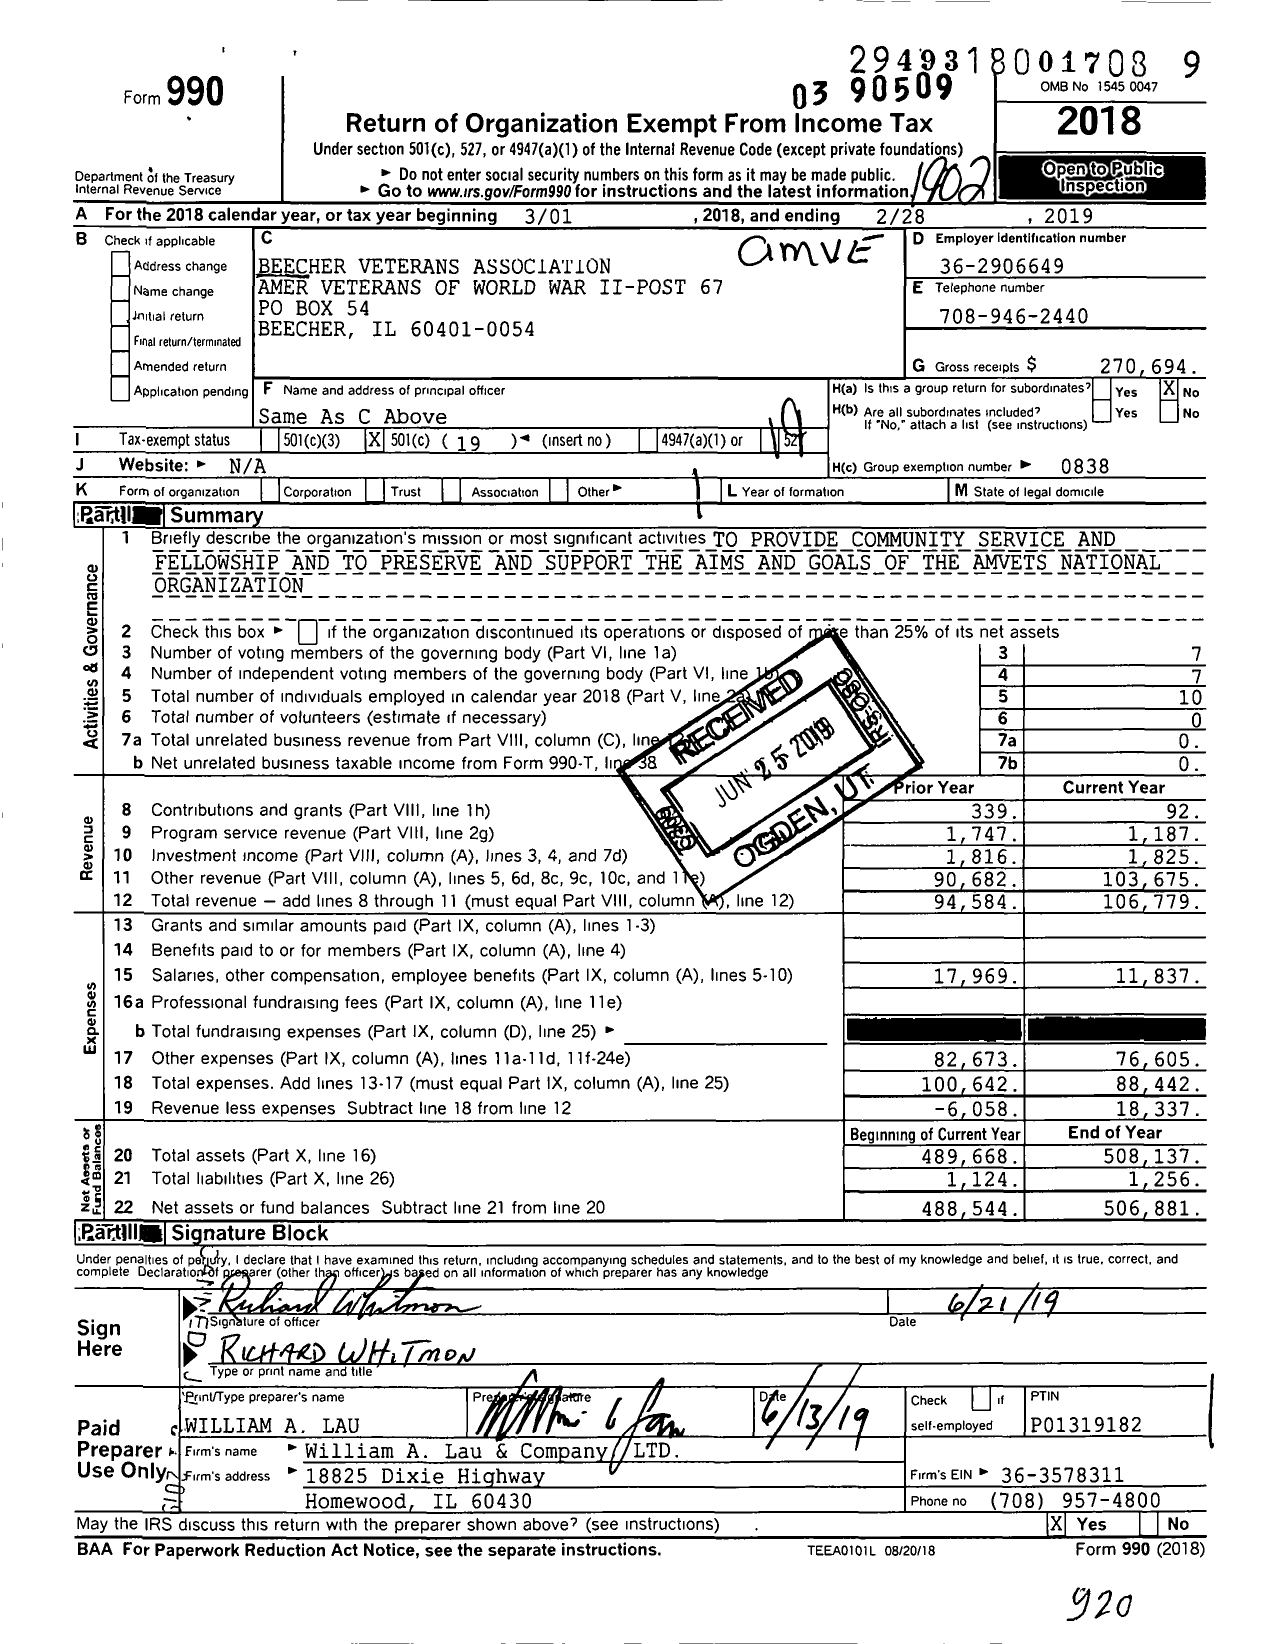 Image of first page of 2018 Form 990O for Amvets - Beecher Veterans Association Amer Veterans of World War Ii Post 67